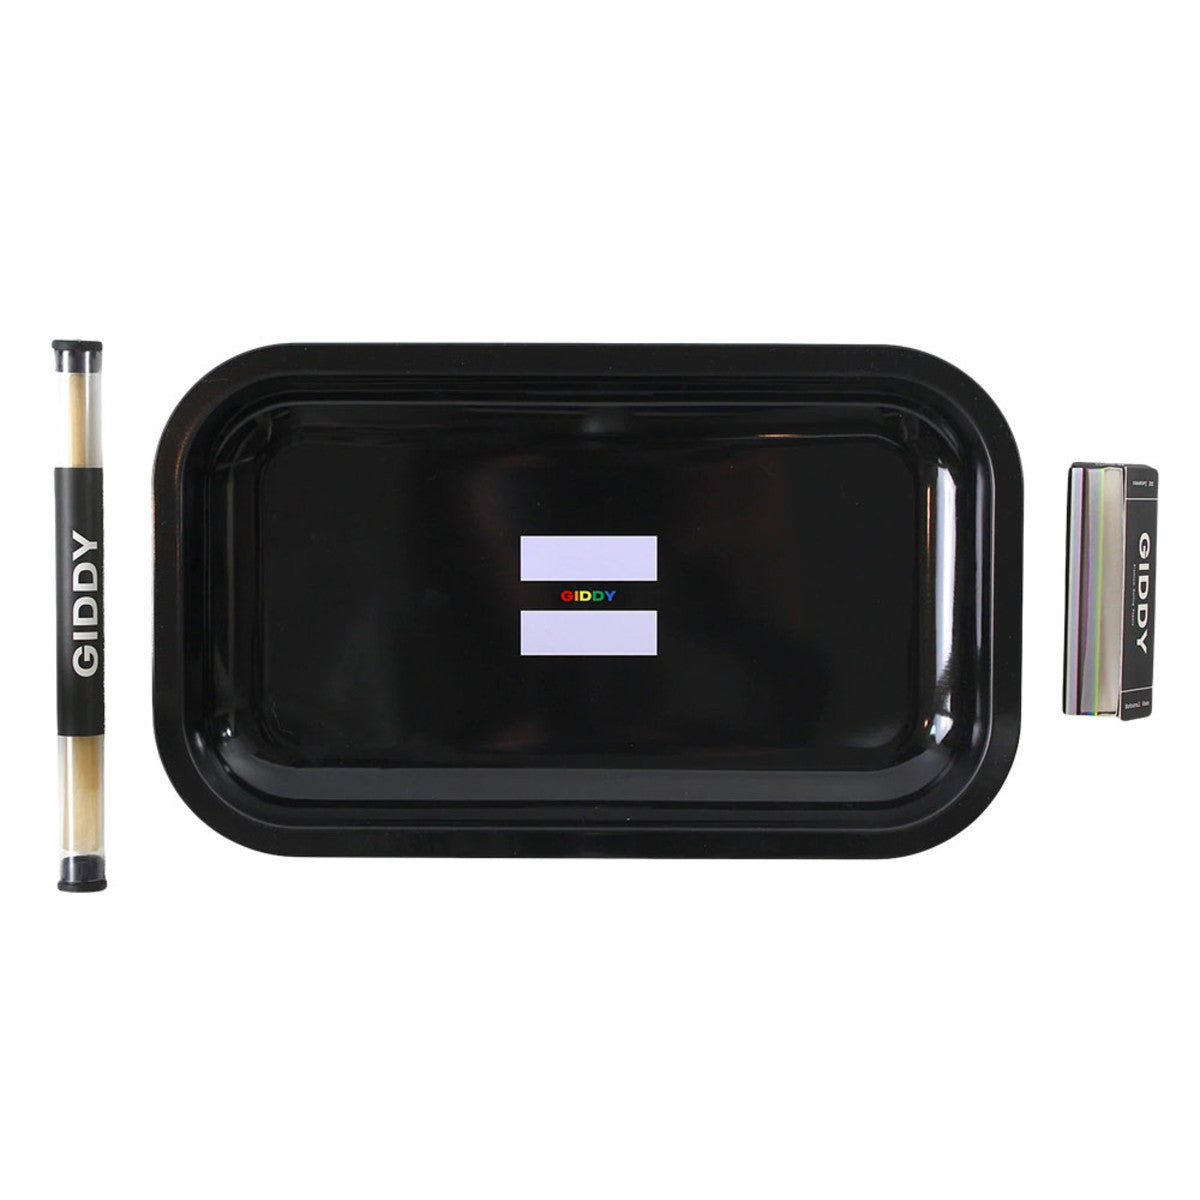 Ugly House Giddy Rolling Tray Bundle - Rainbow